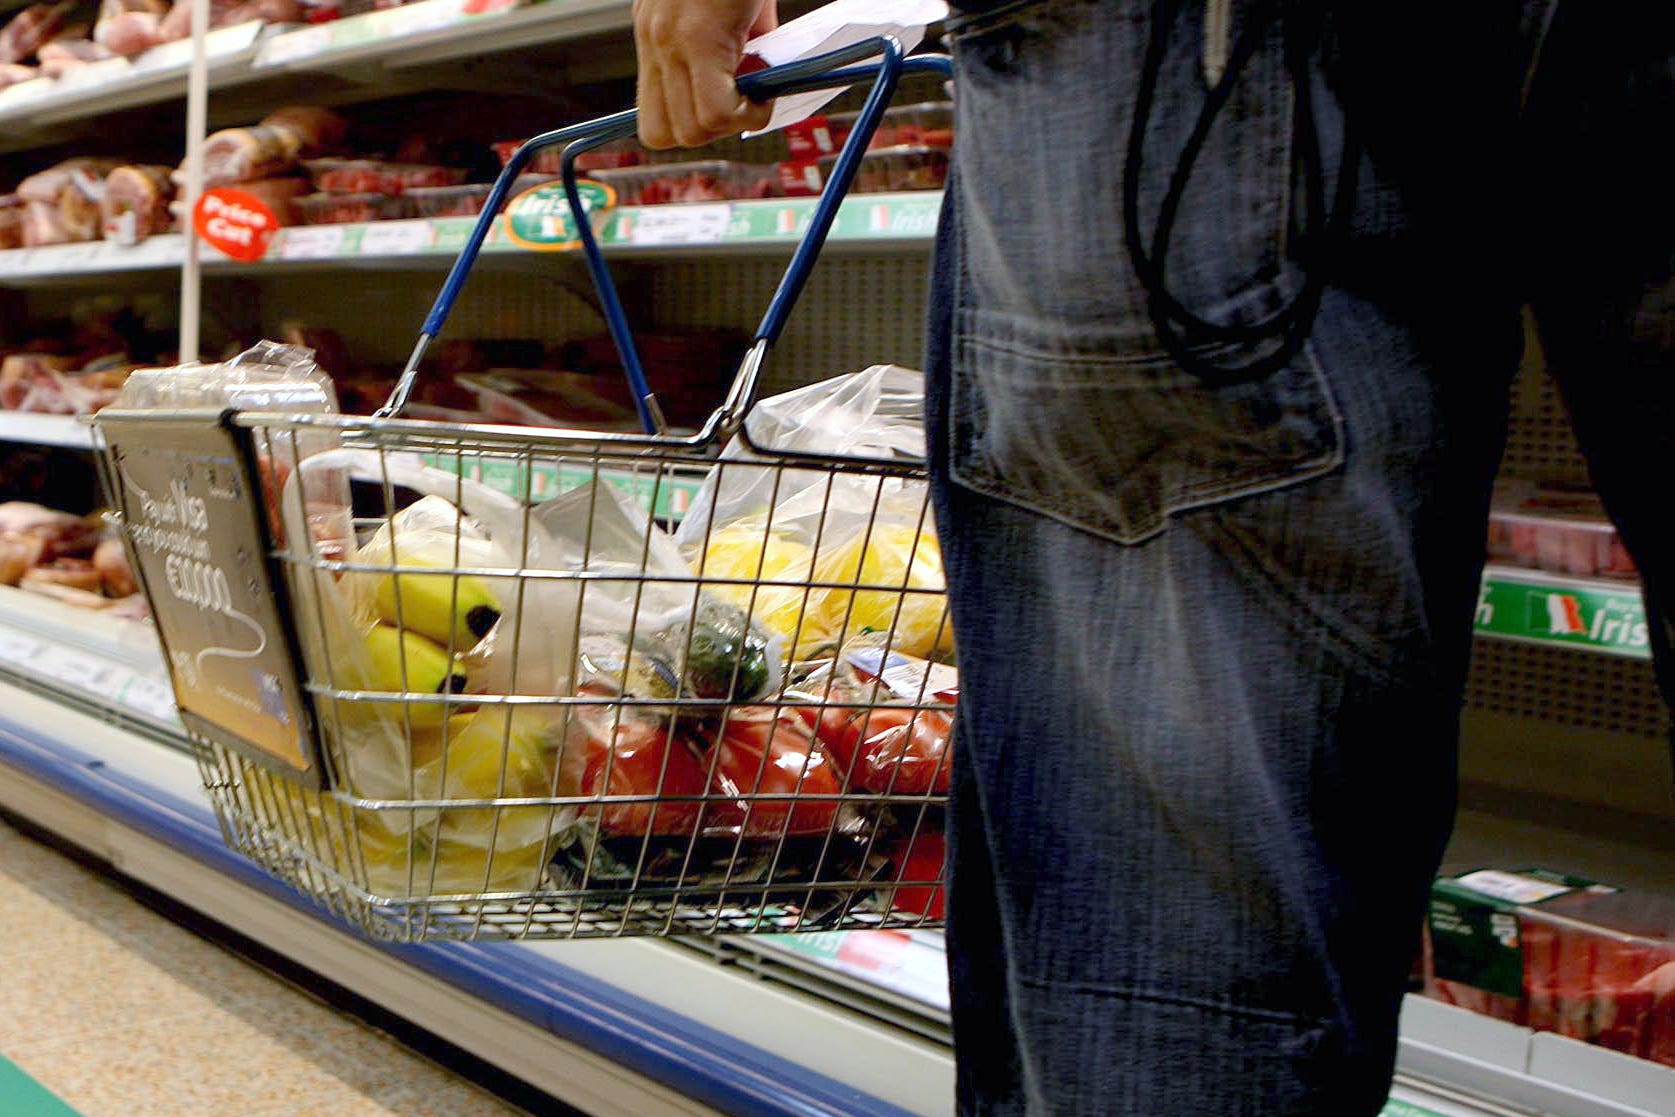 File image: Aldi has been named the cheapest supermarket for groceries